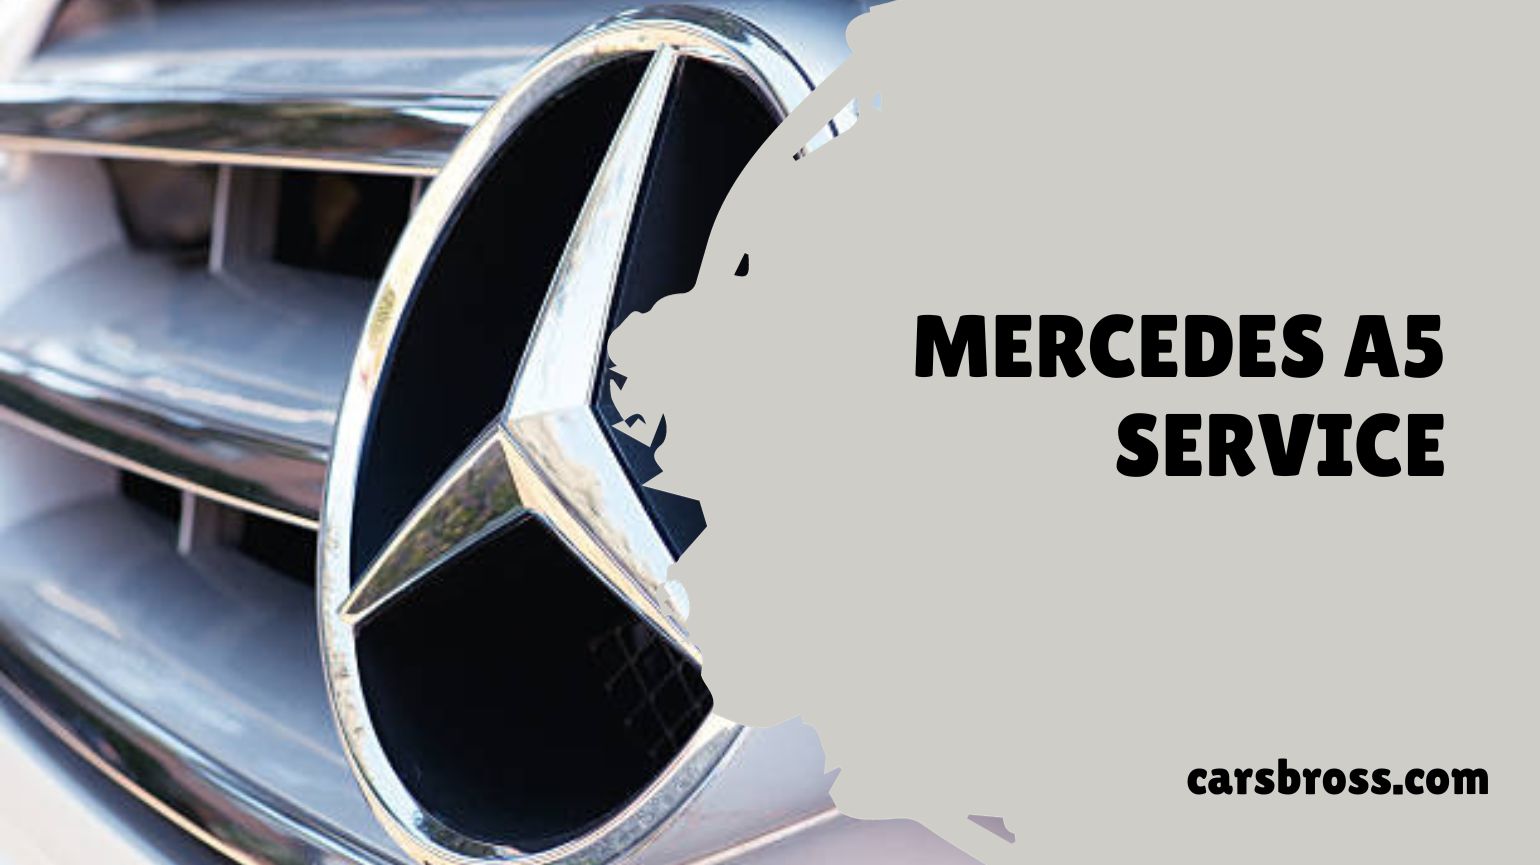 Mercedes A5 Service: Checklist, Benefits & Cost [Explained]